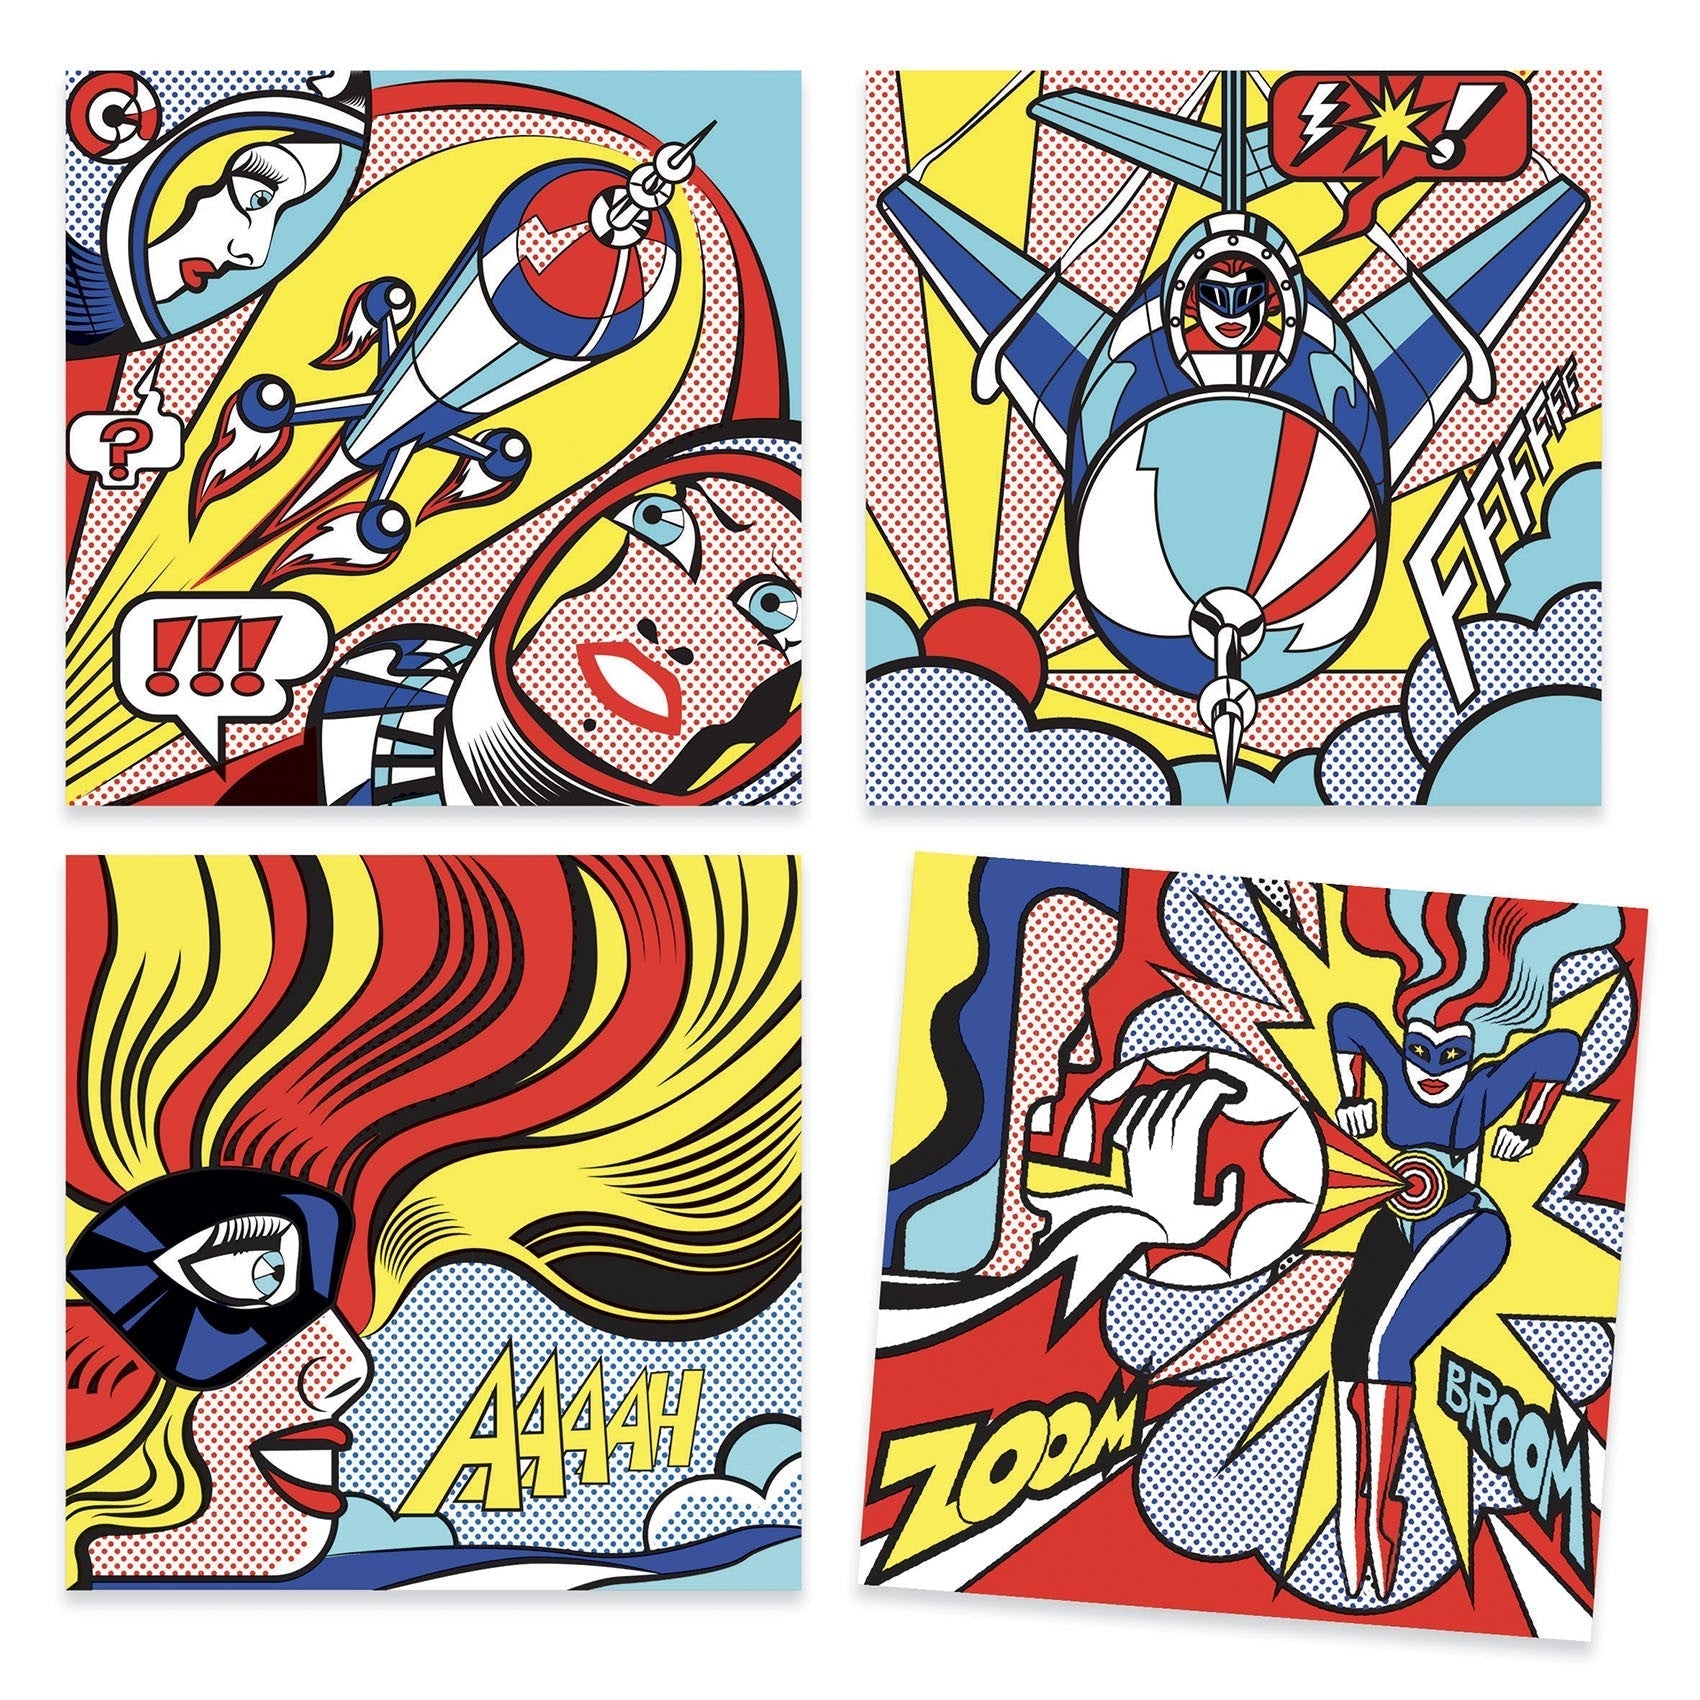 Djeco Design - A Colour and Transfer Activity Set Inspired by - Superheroes